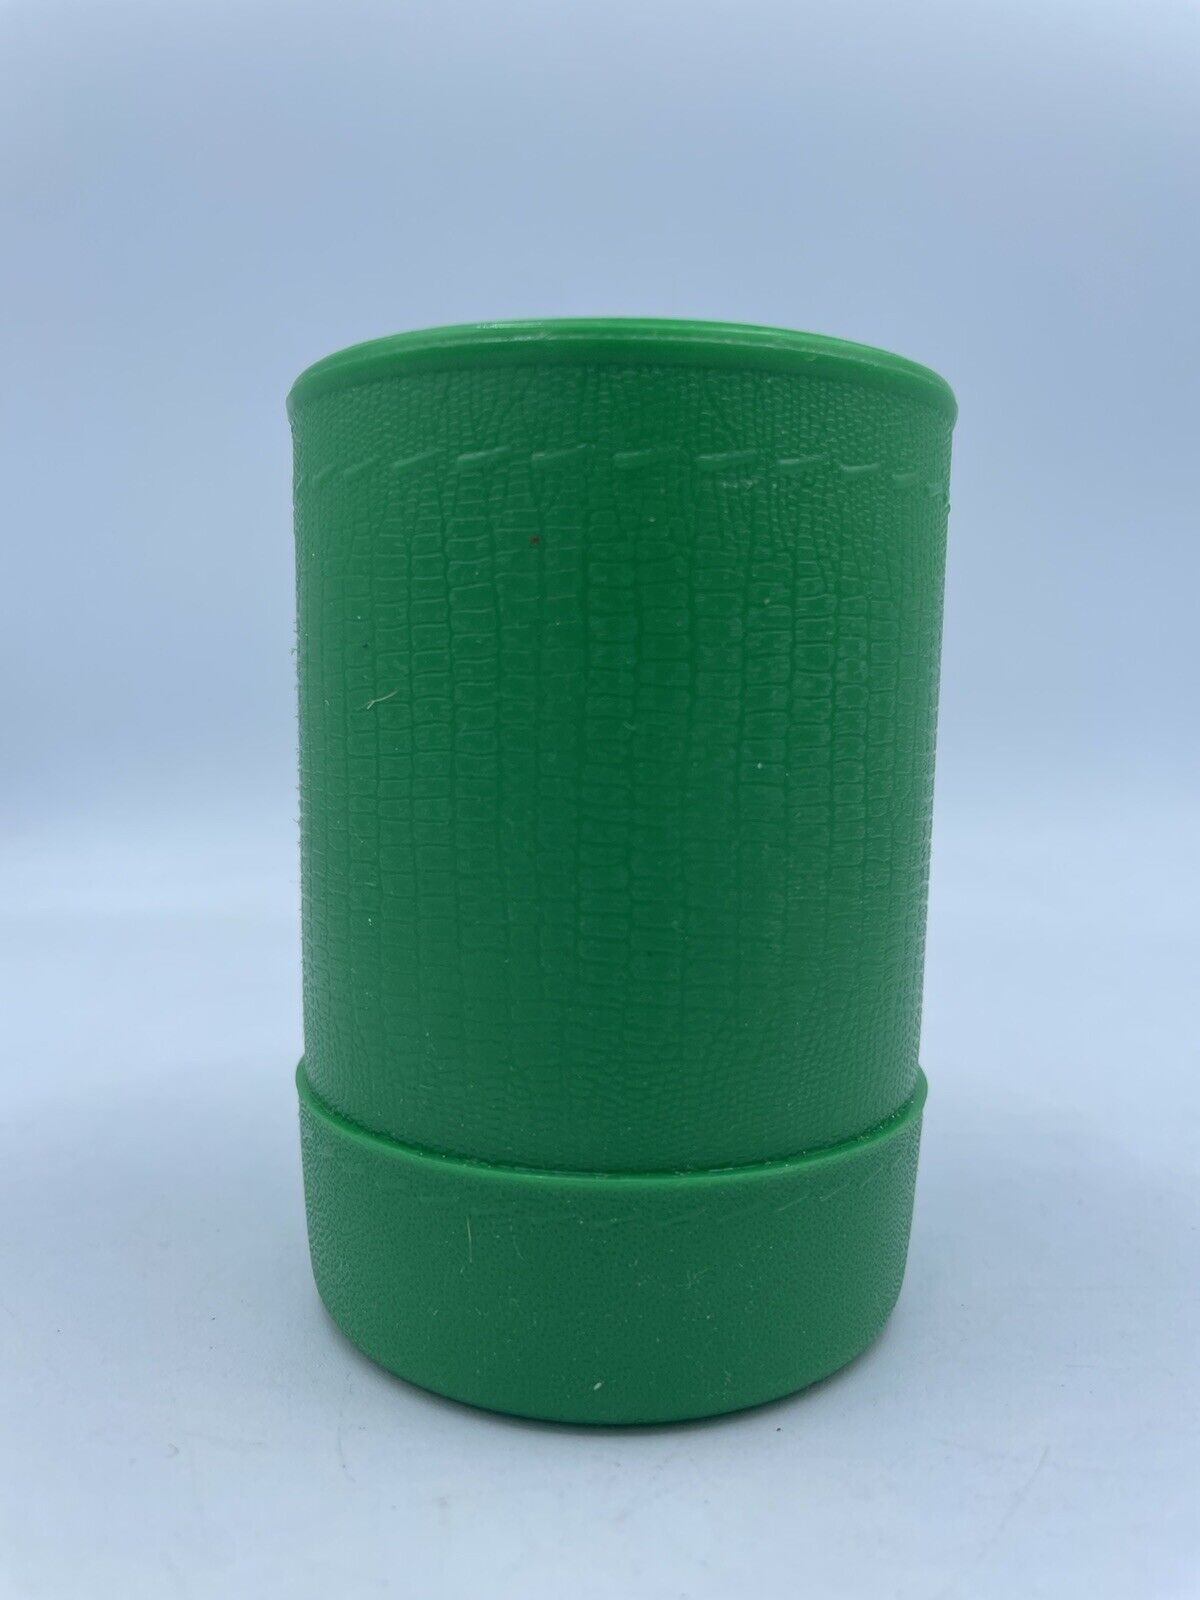 Word Yahtzee Game Replacement Part Shaker Cup Dice Green Milton Bradley USA - $6.89